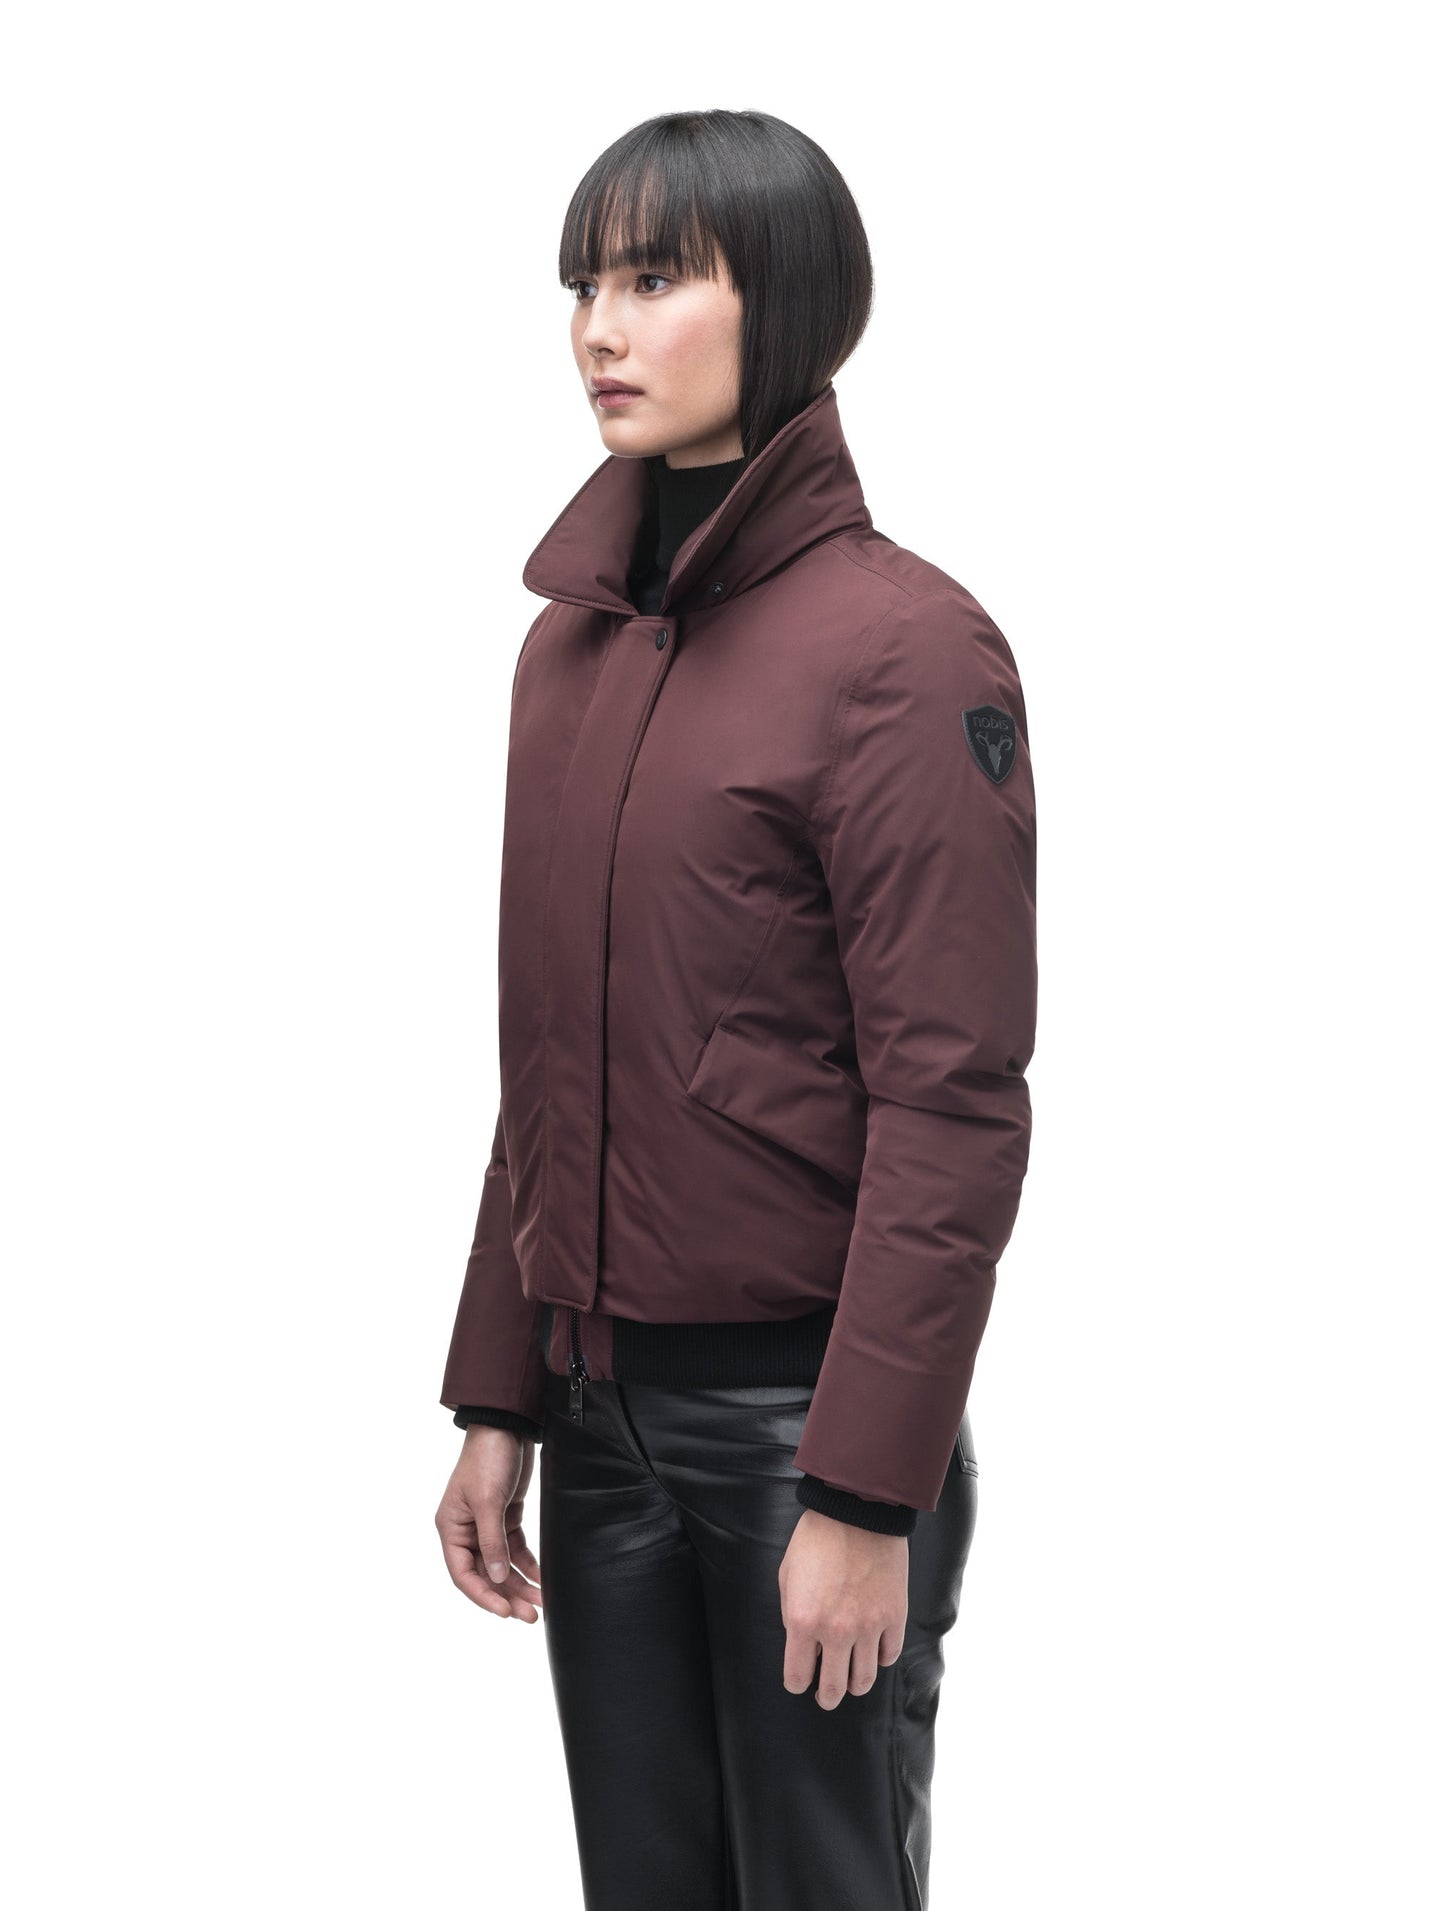 Rae Ladies Aviator Jacket in hip length, Canadian duck down insulation, removable shearling collar with hidden tuckable hood, and two-way front zipper, in Merlot